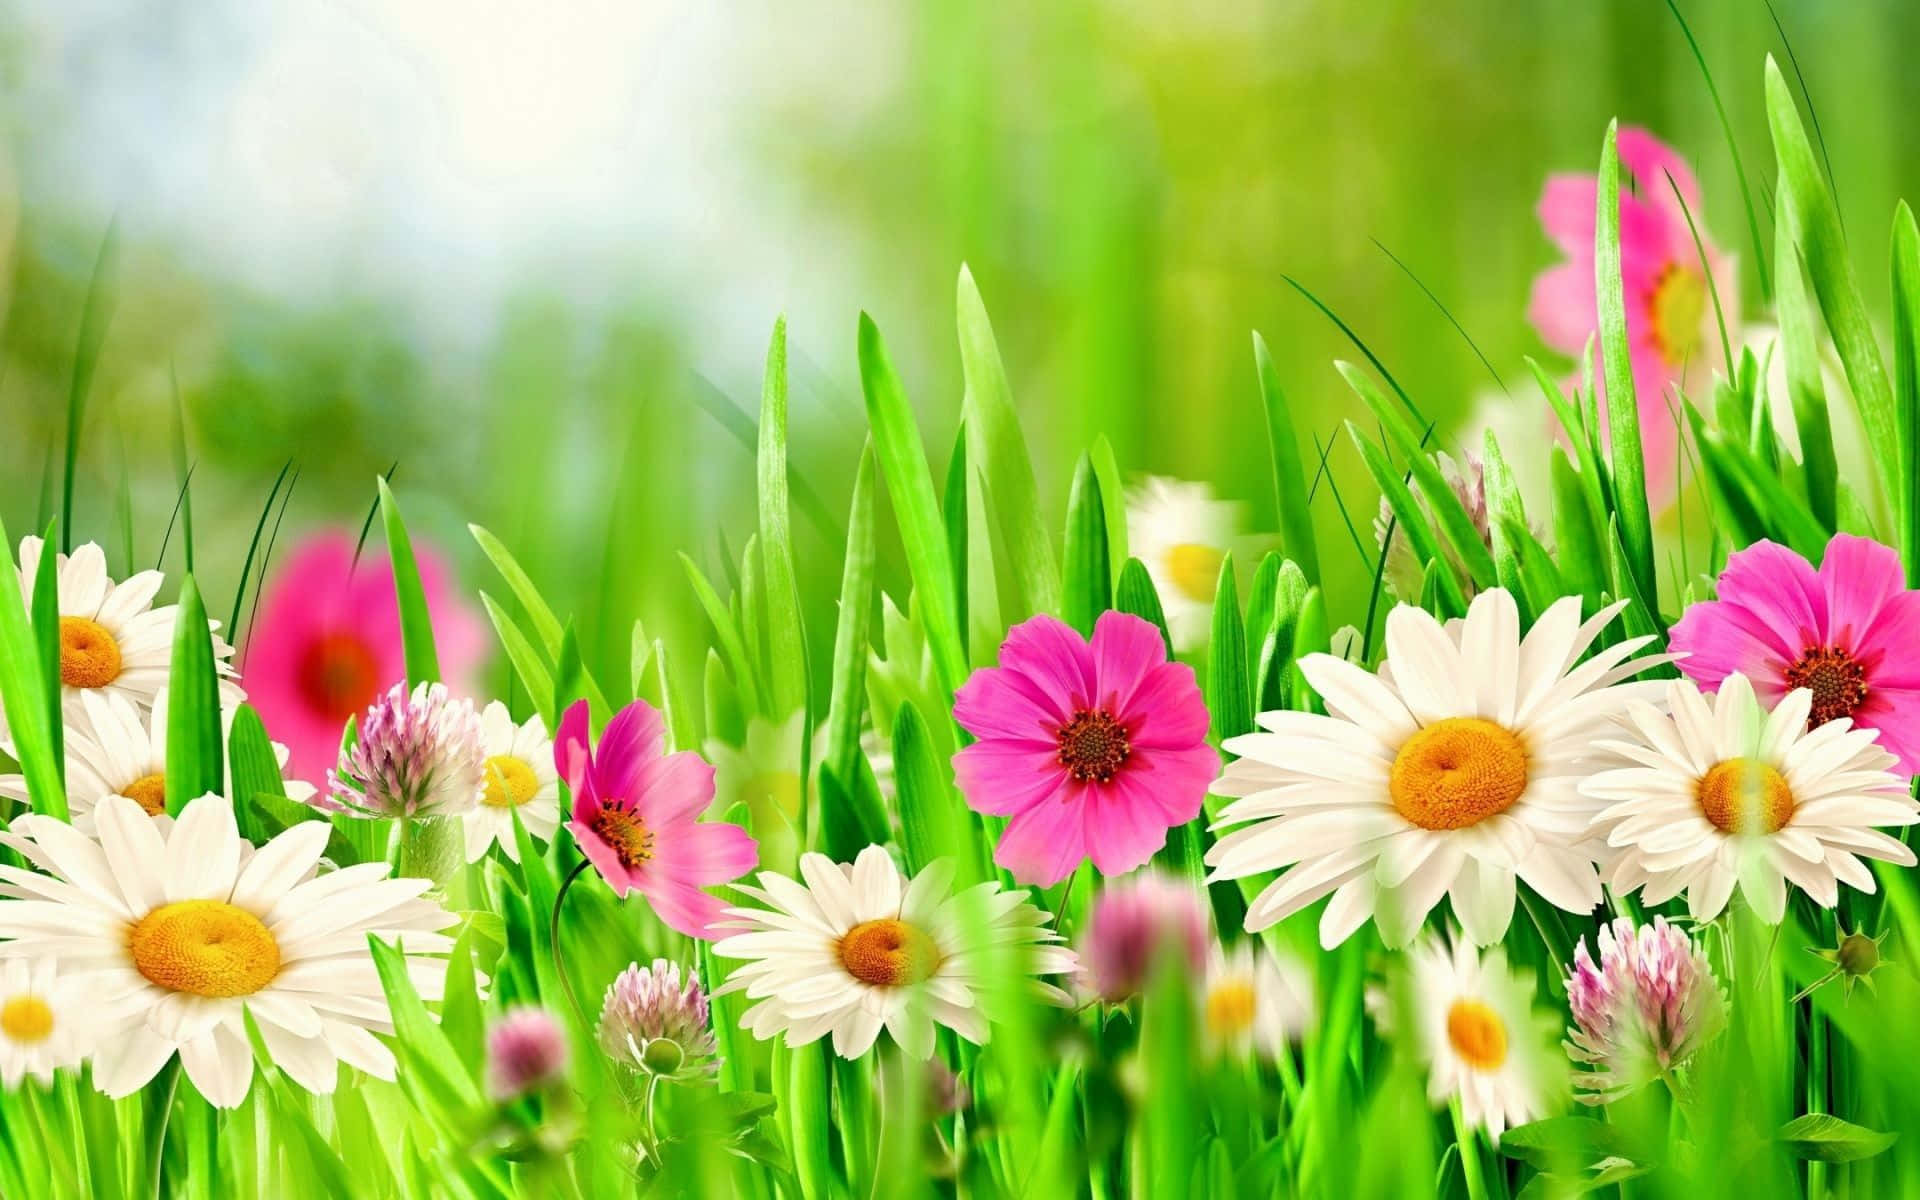 Enjoy the Beauty of Nature with an HD Spring Flowers Desktop Wallpaper